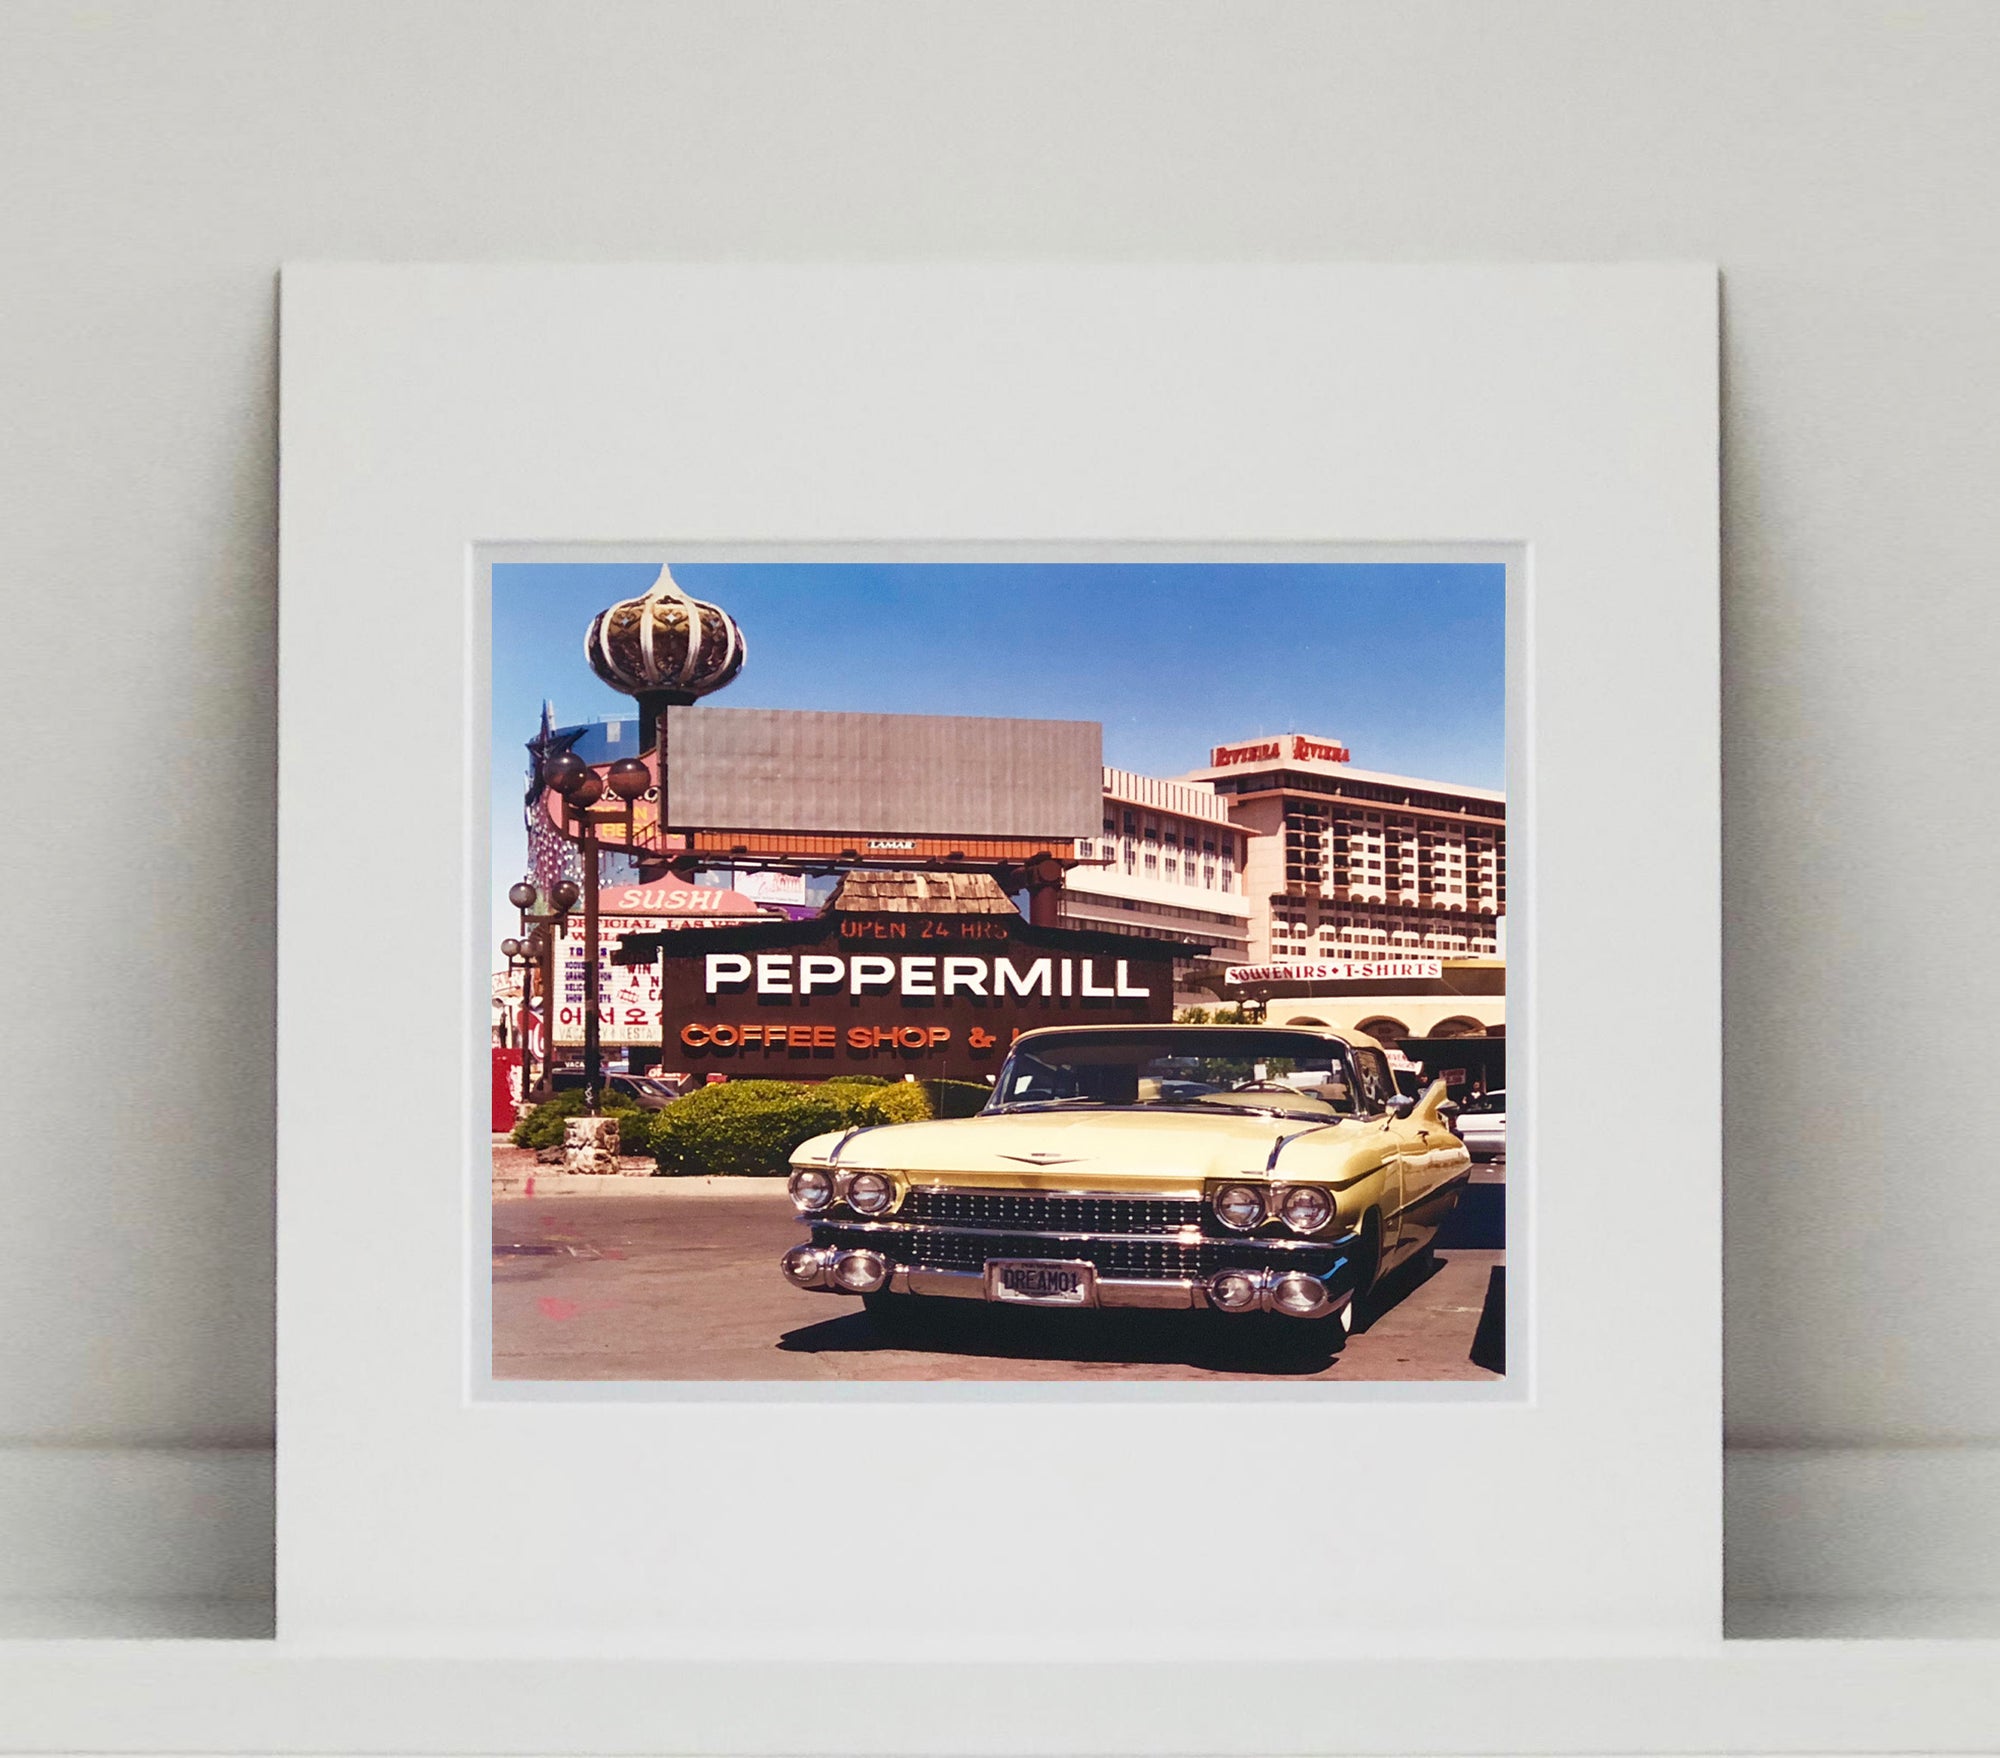 'The Silver State' was taken by Richard whilst at Viva Las Vegas 2001, where he was photographing for Classic American magazine. This photograph which shows a vintage car in front of a typical Las Vegas backdrop was chosen as the lead image for the magazine feature which focused on the iconic La Concha motel.